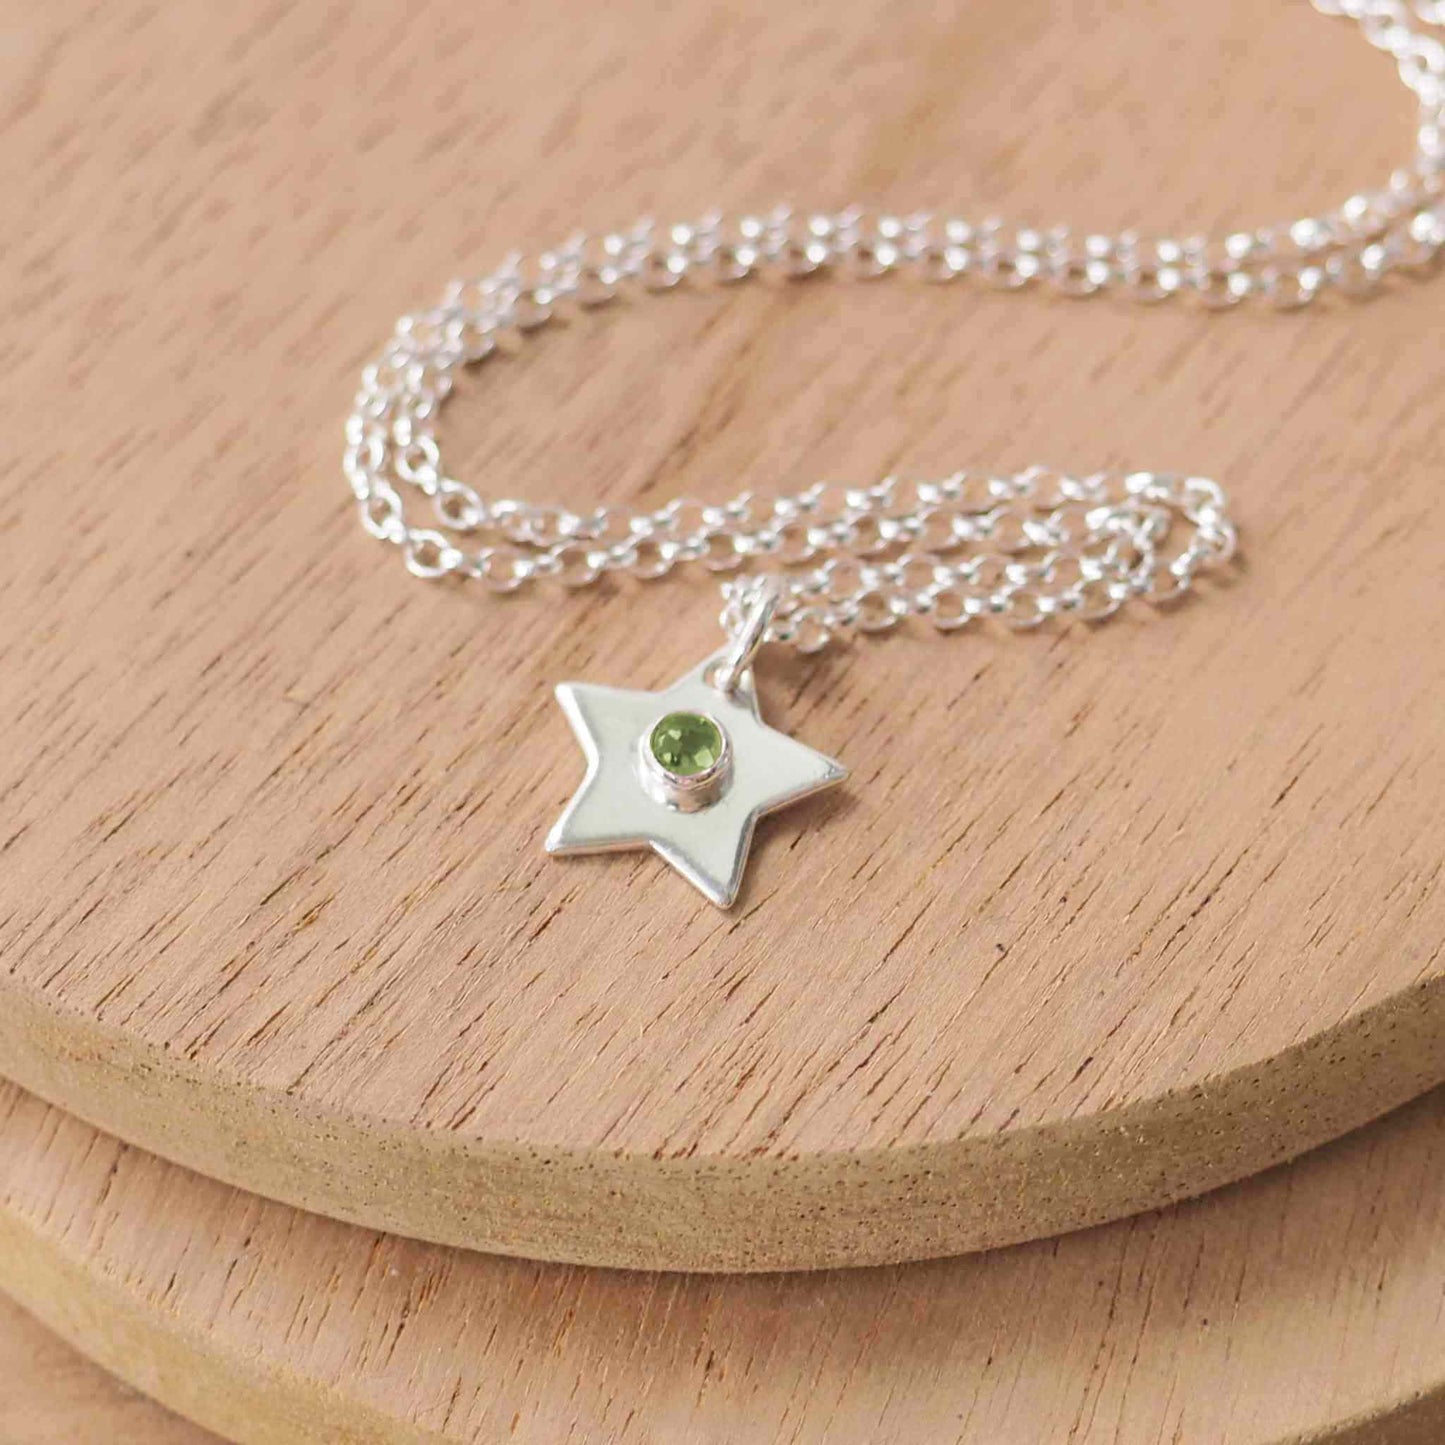 Simple silver star pendant with August Birthstone Peridot which is a green gemstone. The pendant is made from Sterling Silver and is handmade by maram jewellery in Scotland UK